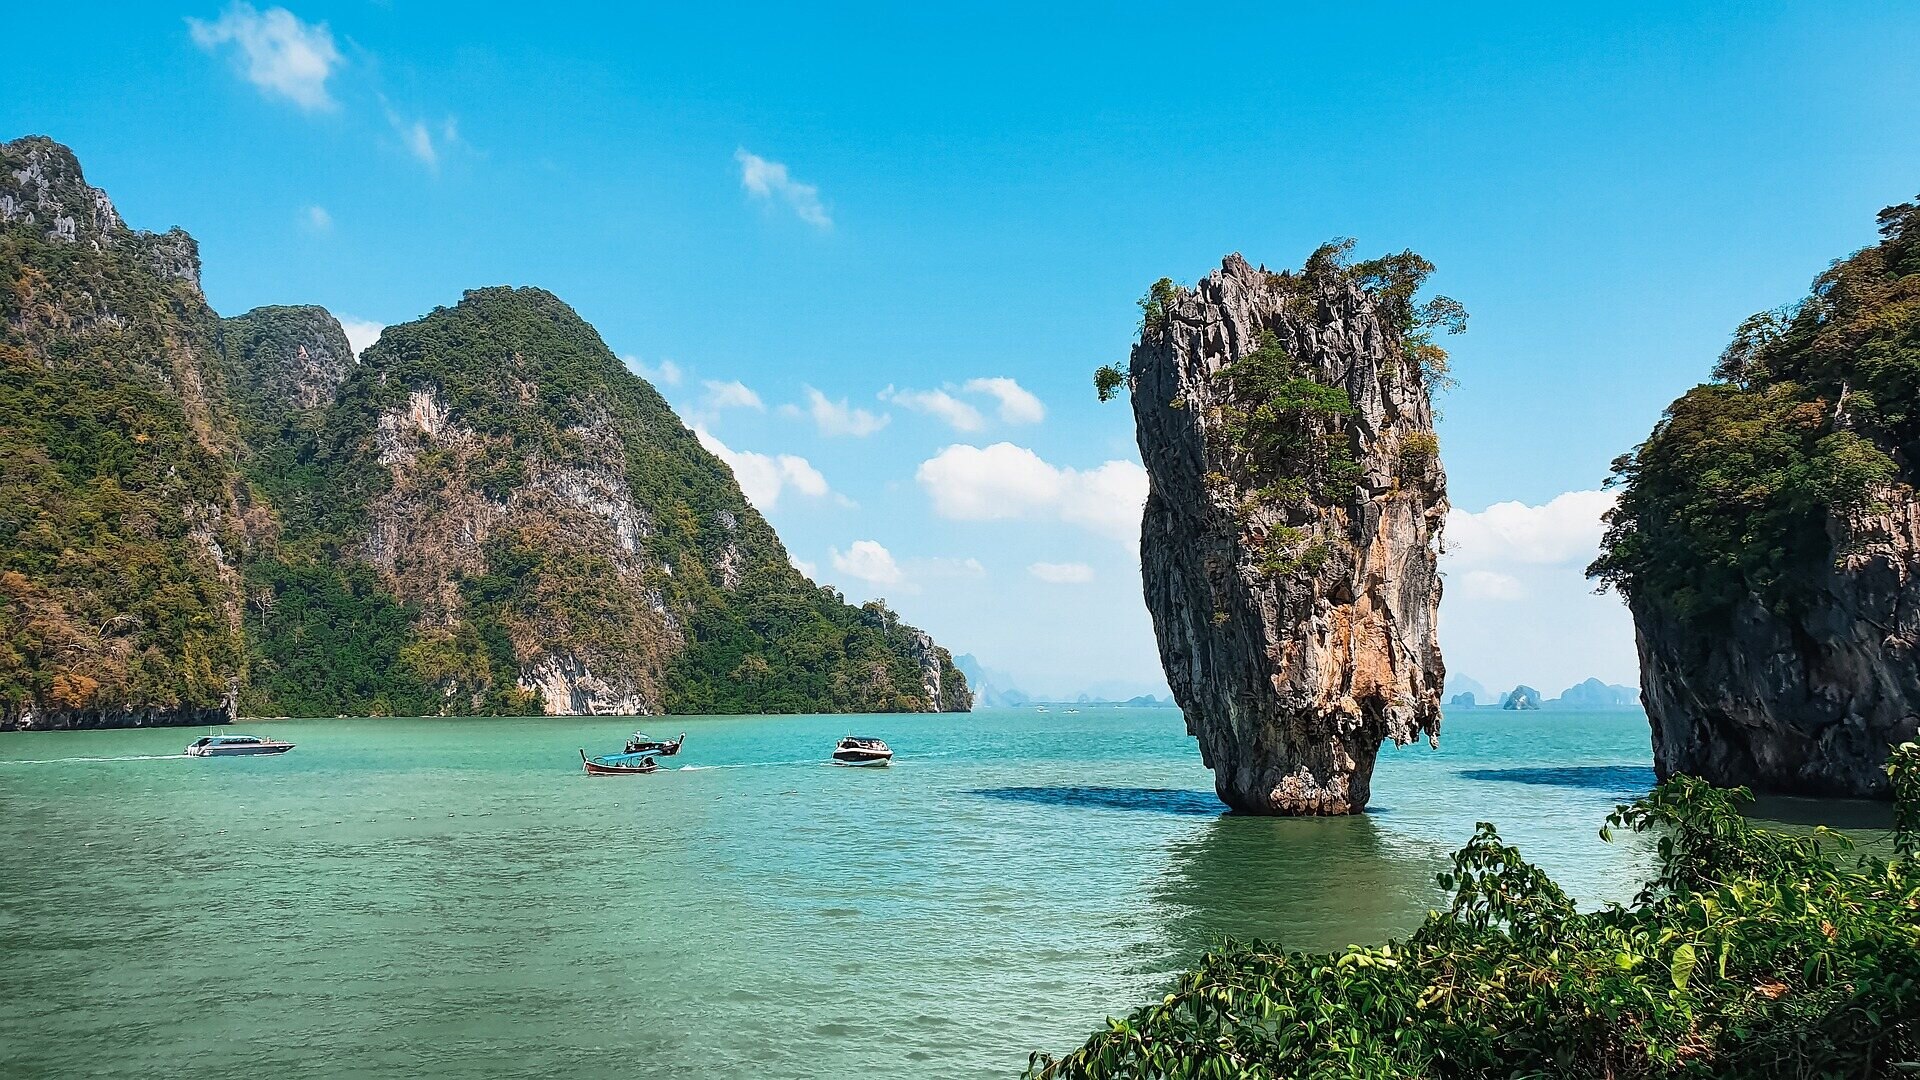 Thailand Delights: Experience the Best of Culture, Nature, and Serenity in 4 Days